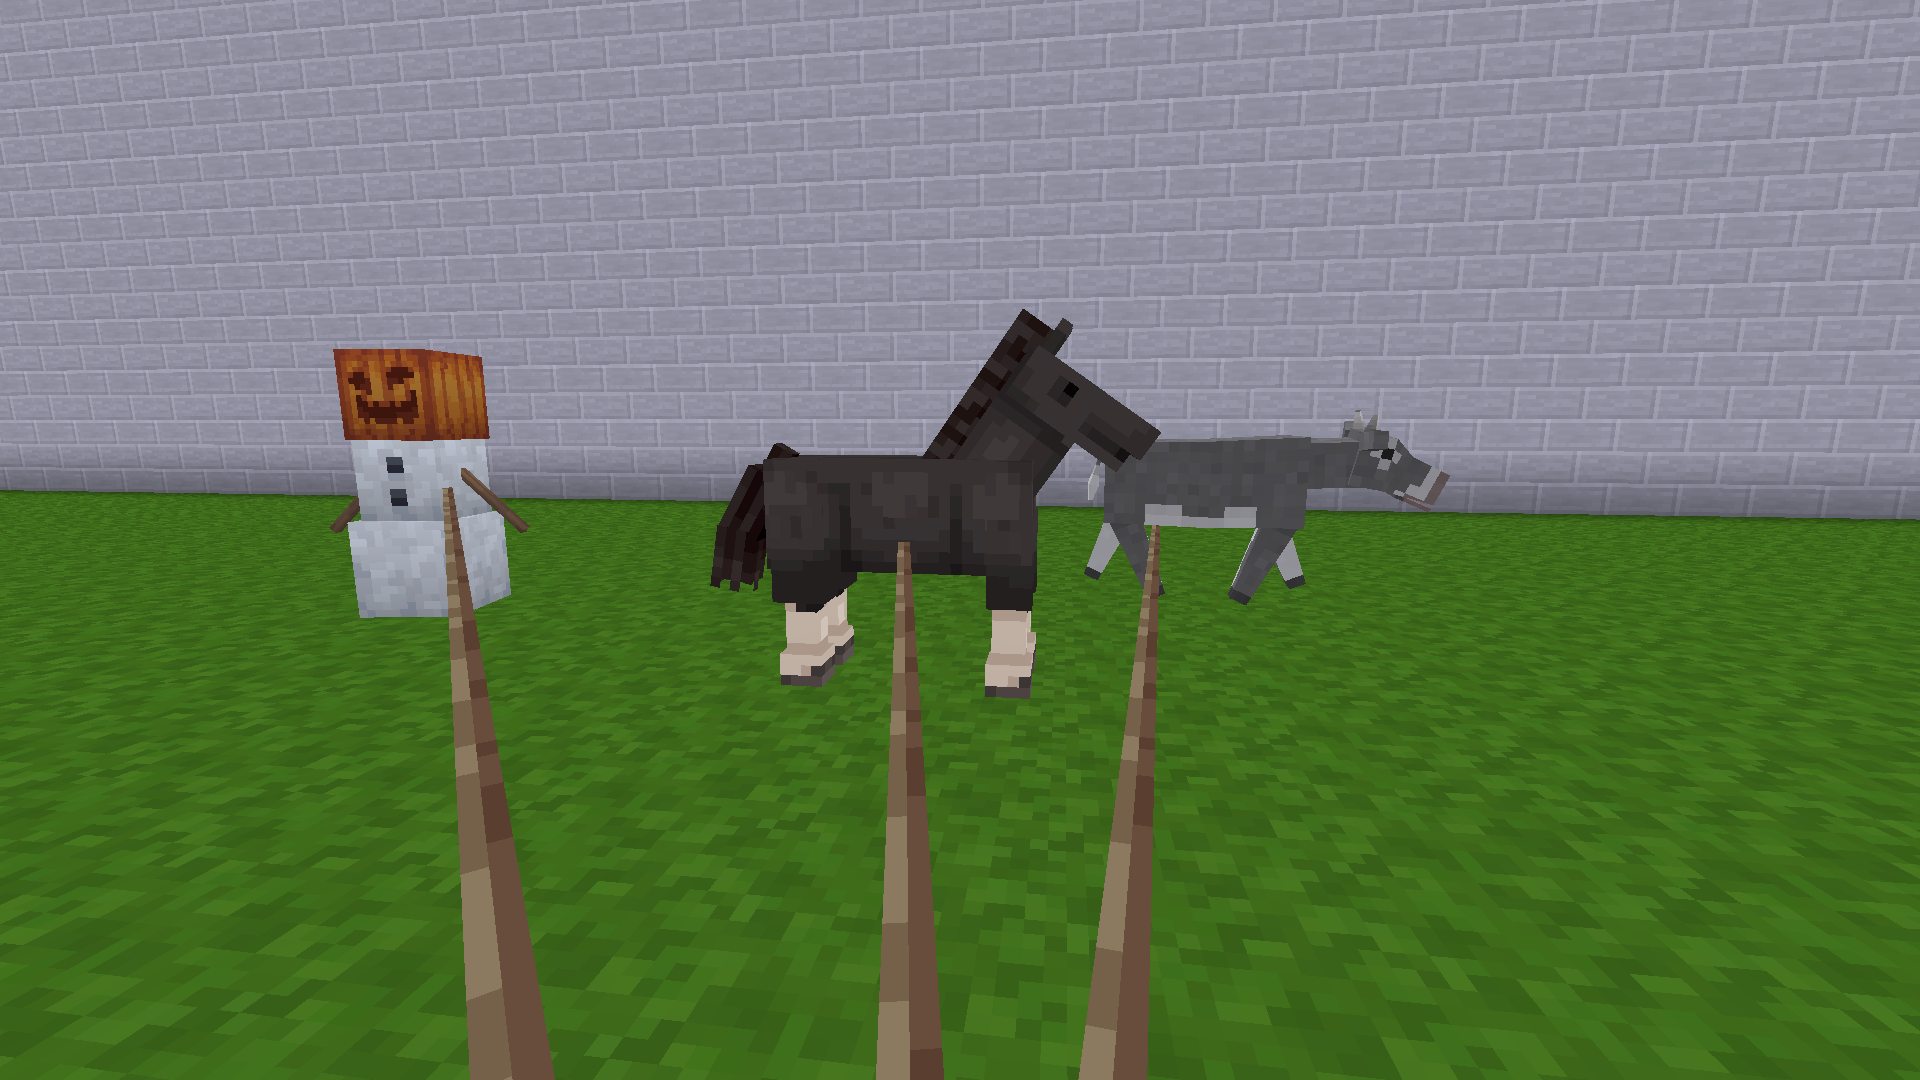 A snow golem, a horse, and a cow on leads